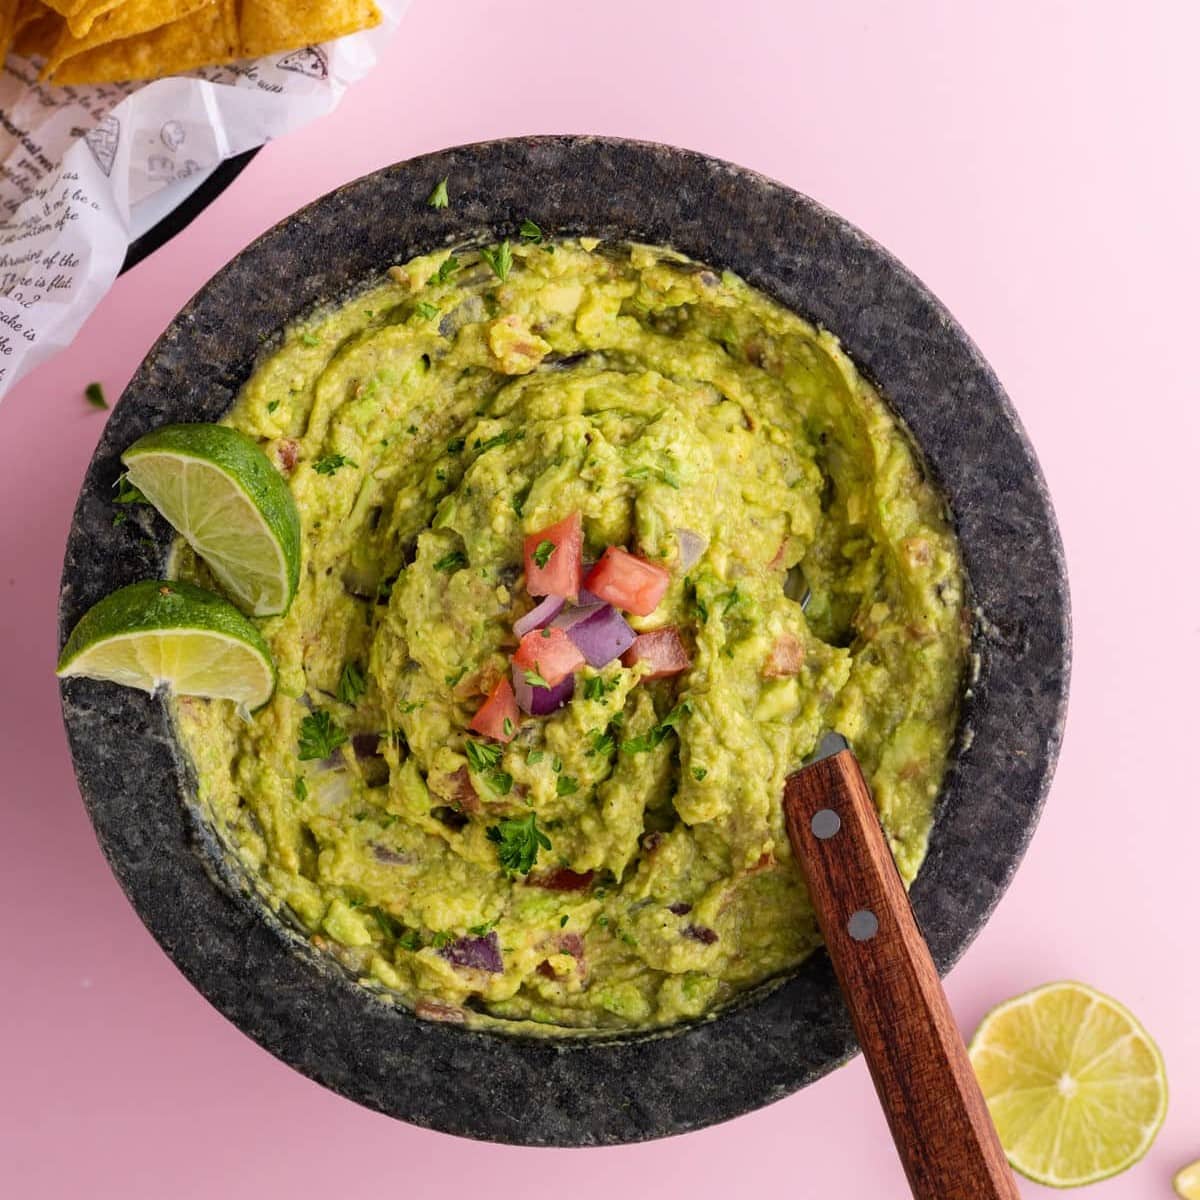 Shareable dip recipes including guacamole